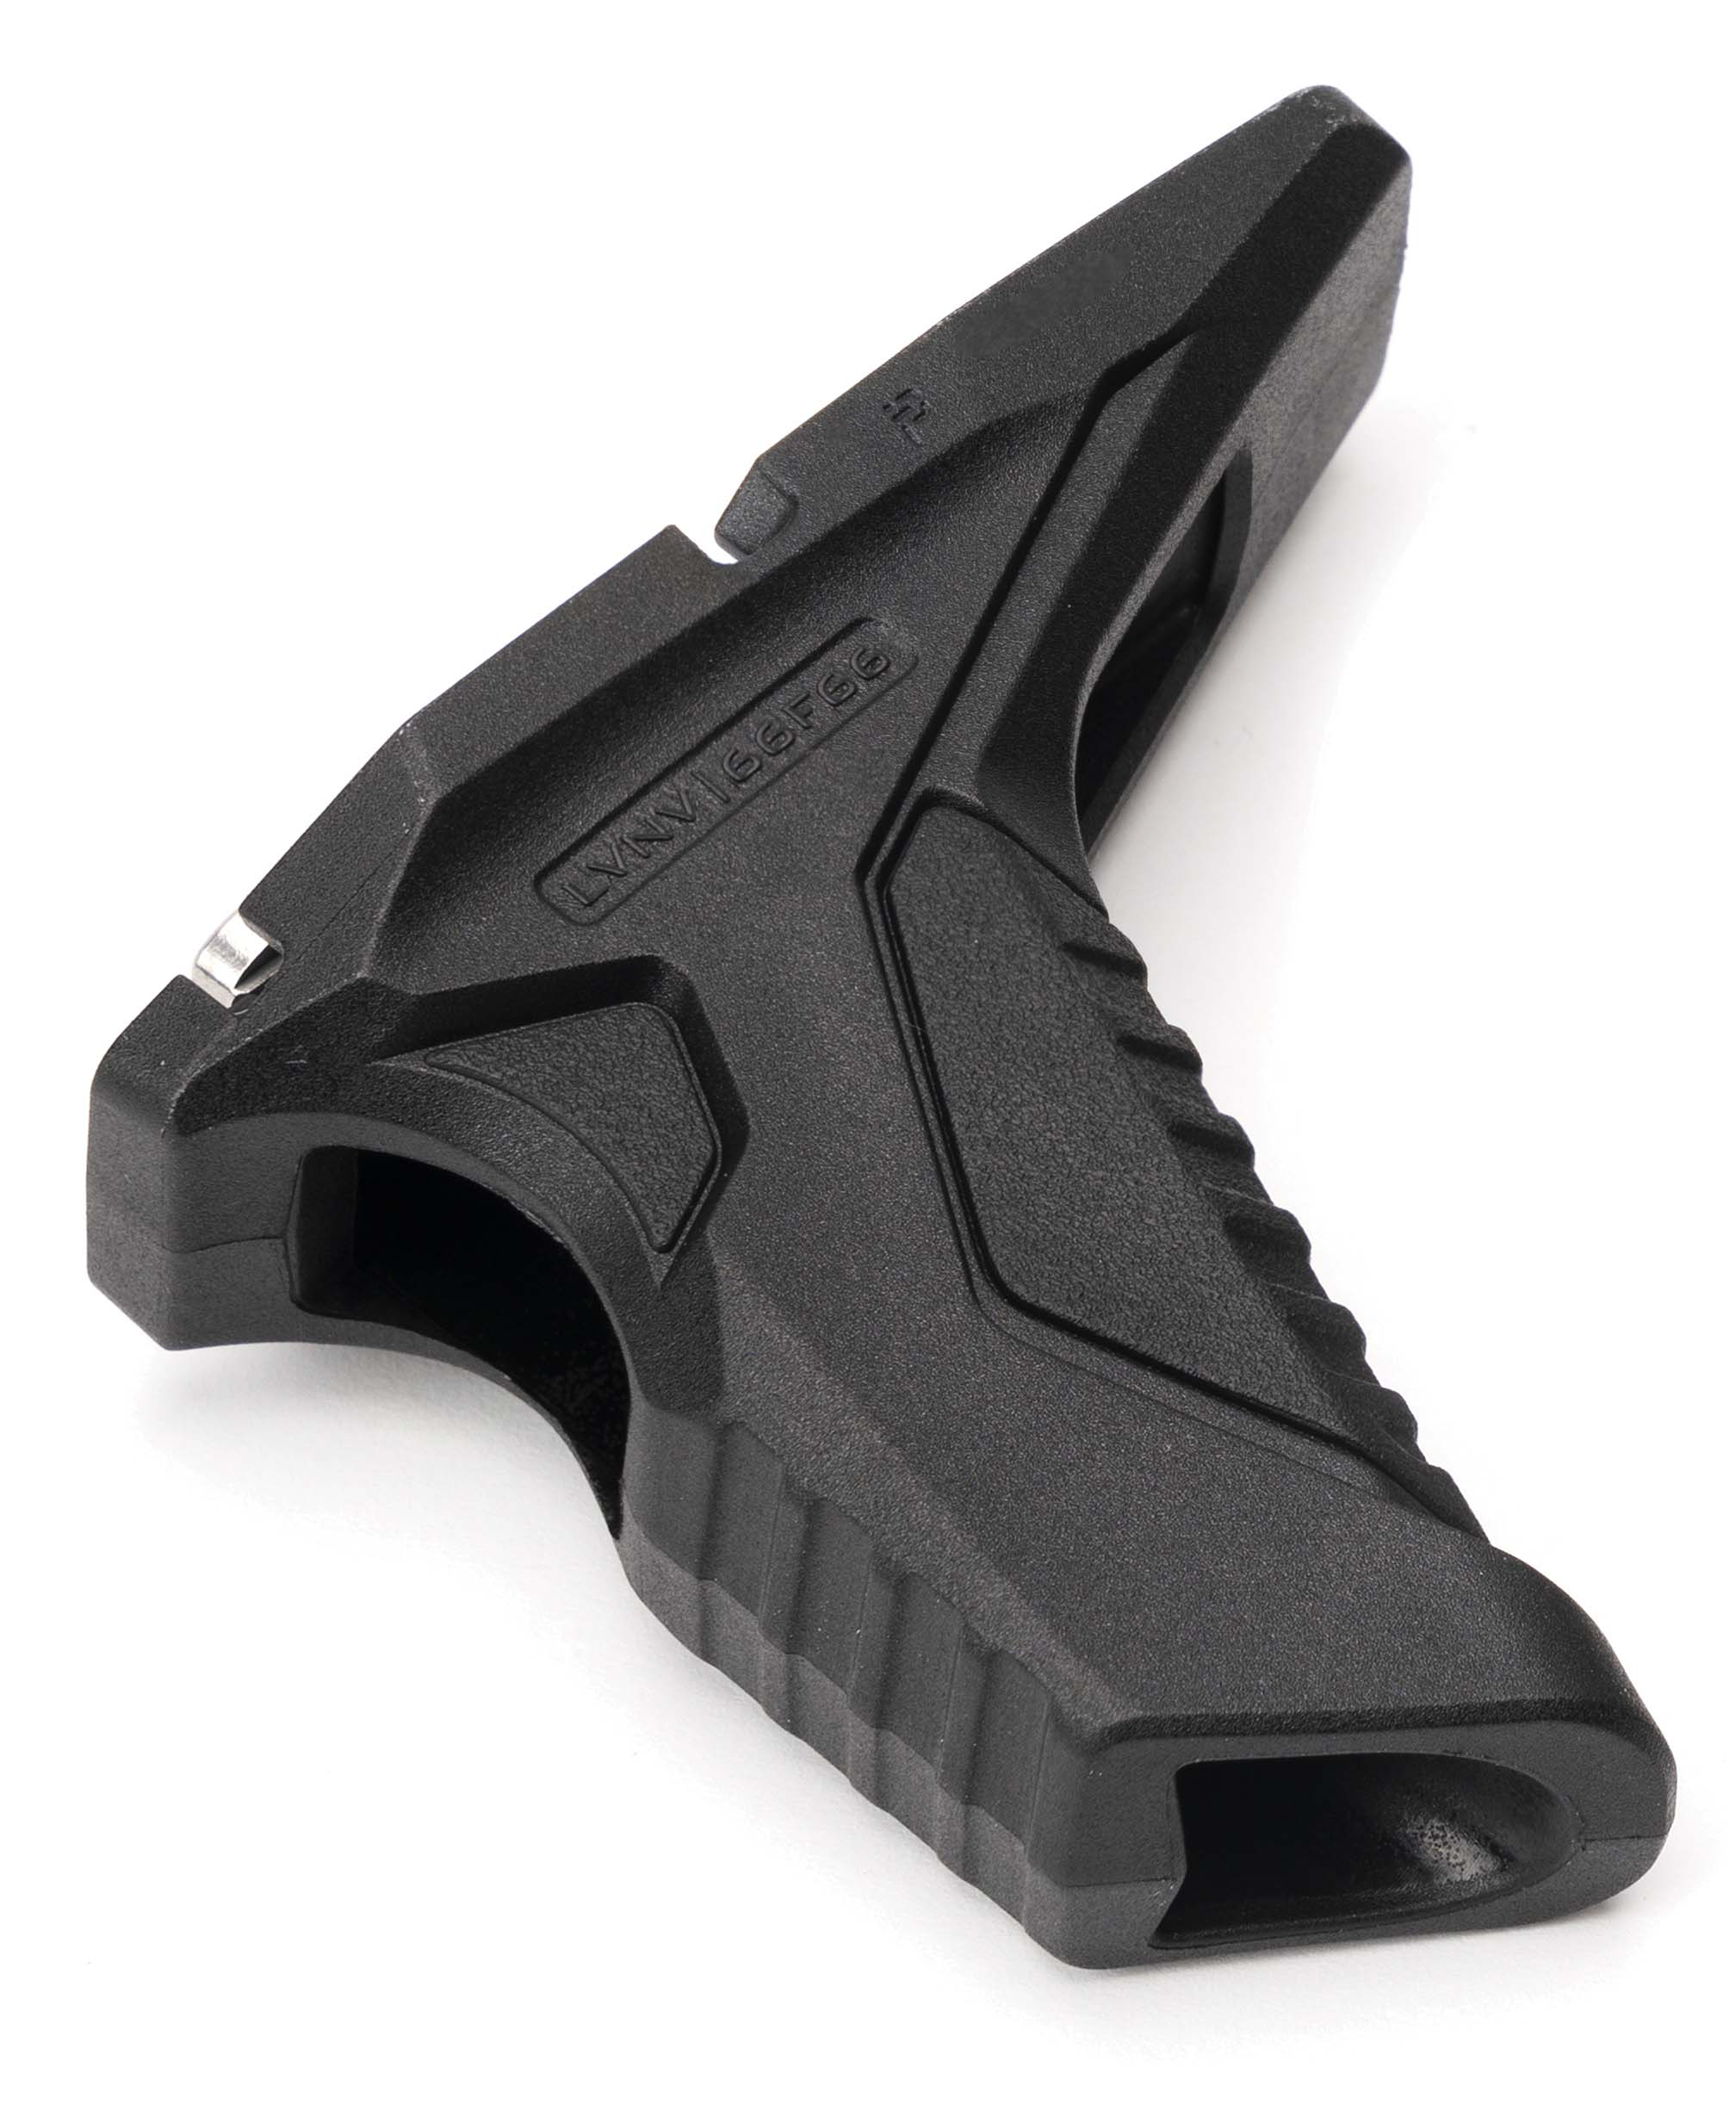 Strike Industries Picatinny Angled Vertical Grip w/ Cable